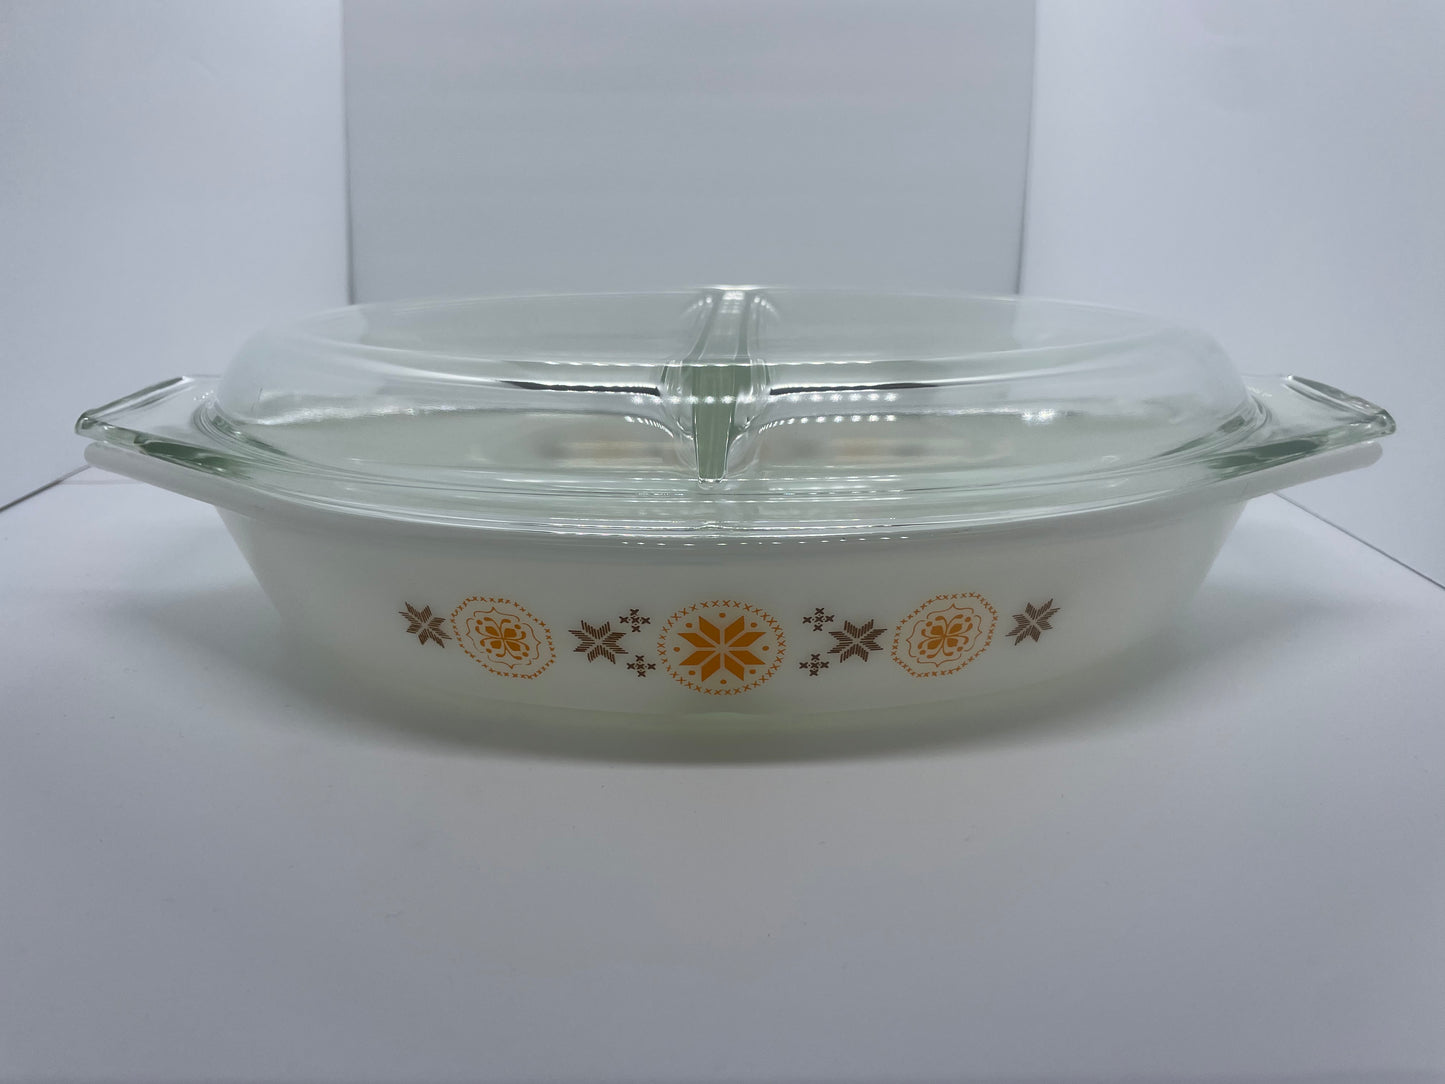 Vintage Pyrex Town and Country Divided Casserole Dish 1 1/2 